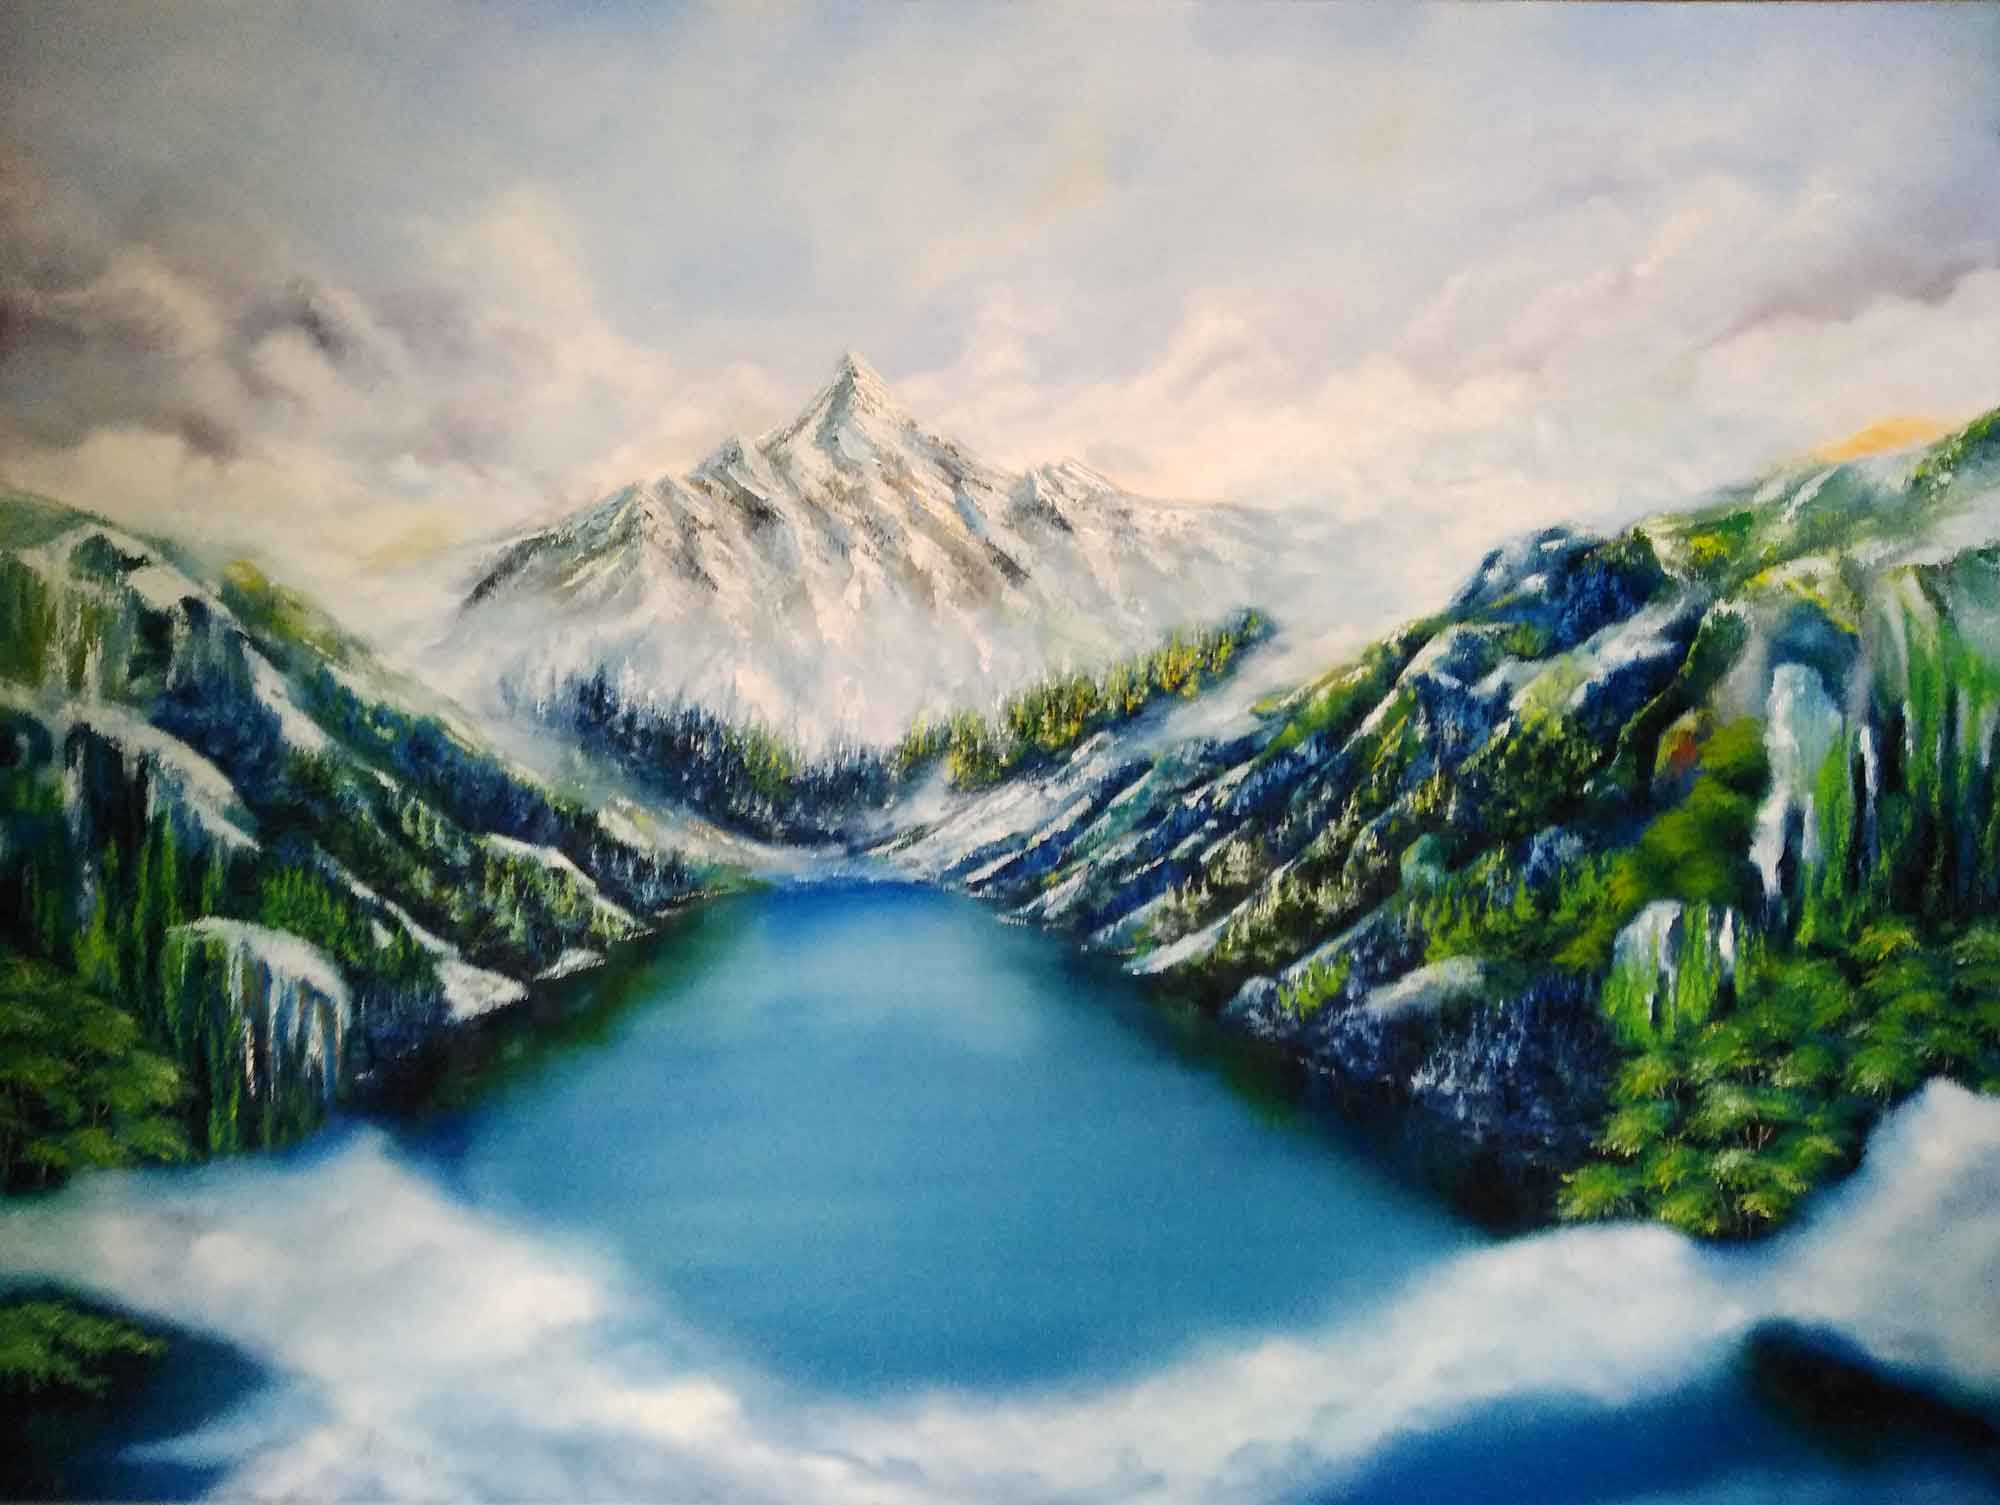 Realism Painting with Oil on Canvas "Mountains of Himalayan" art by Monika Vishwakarma